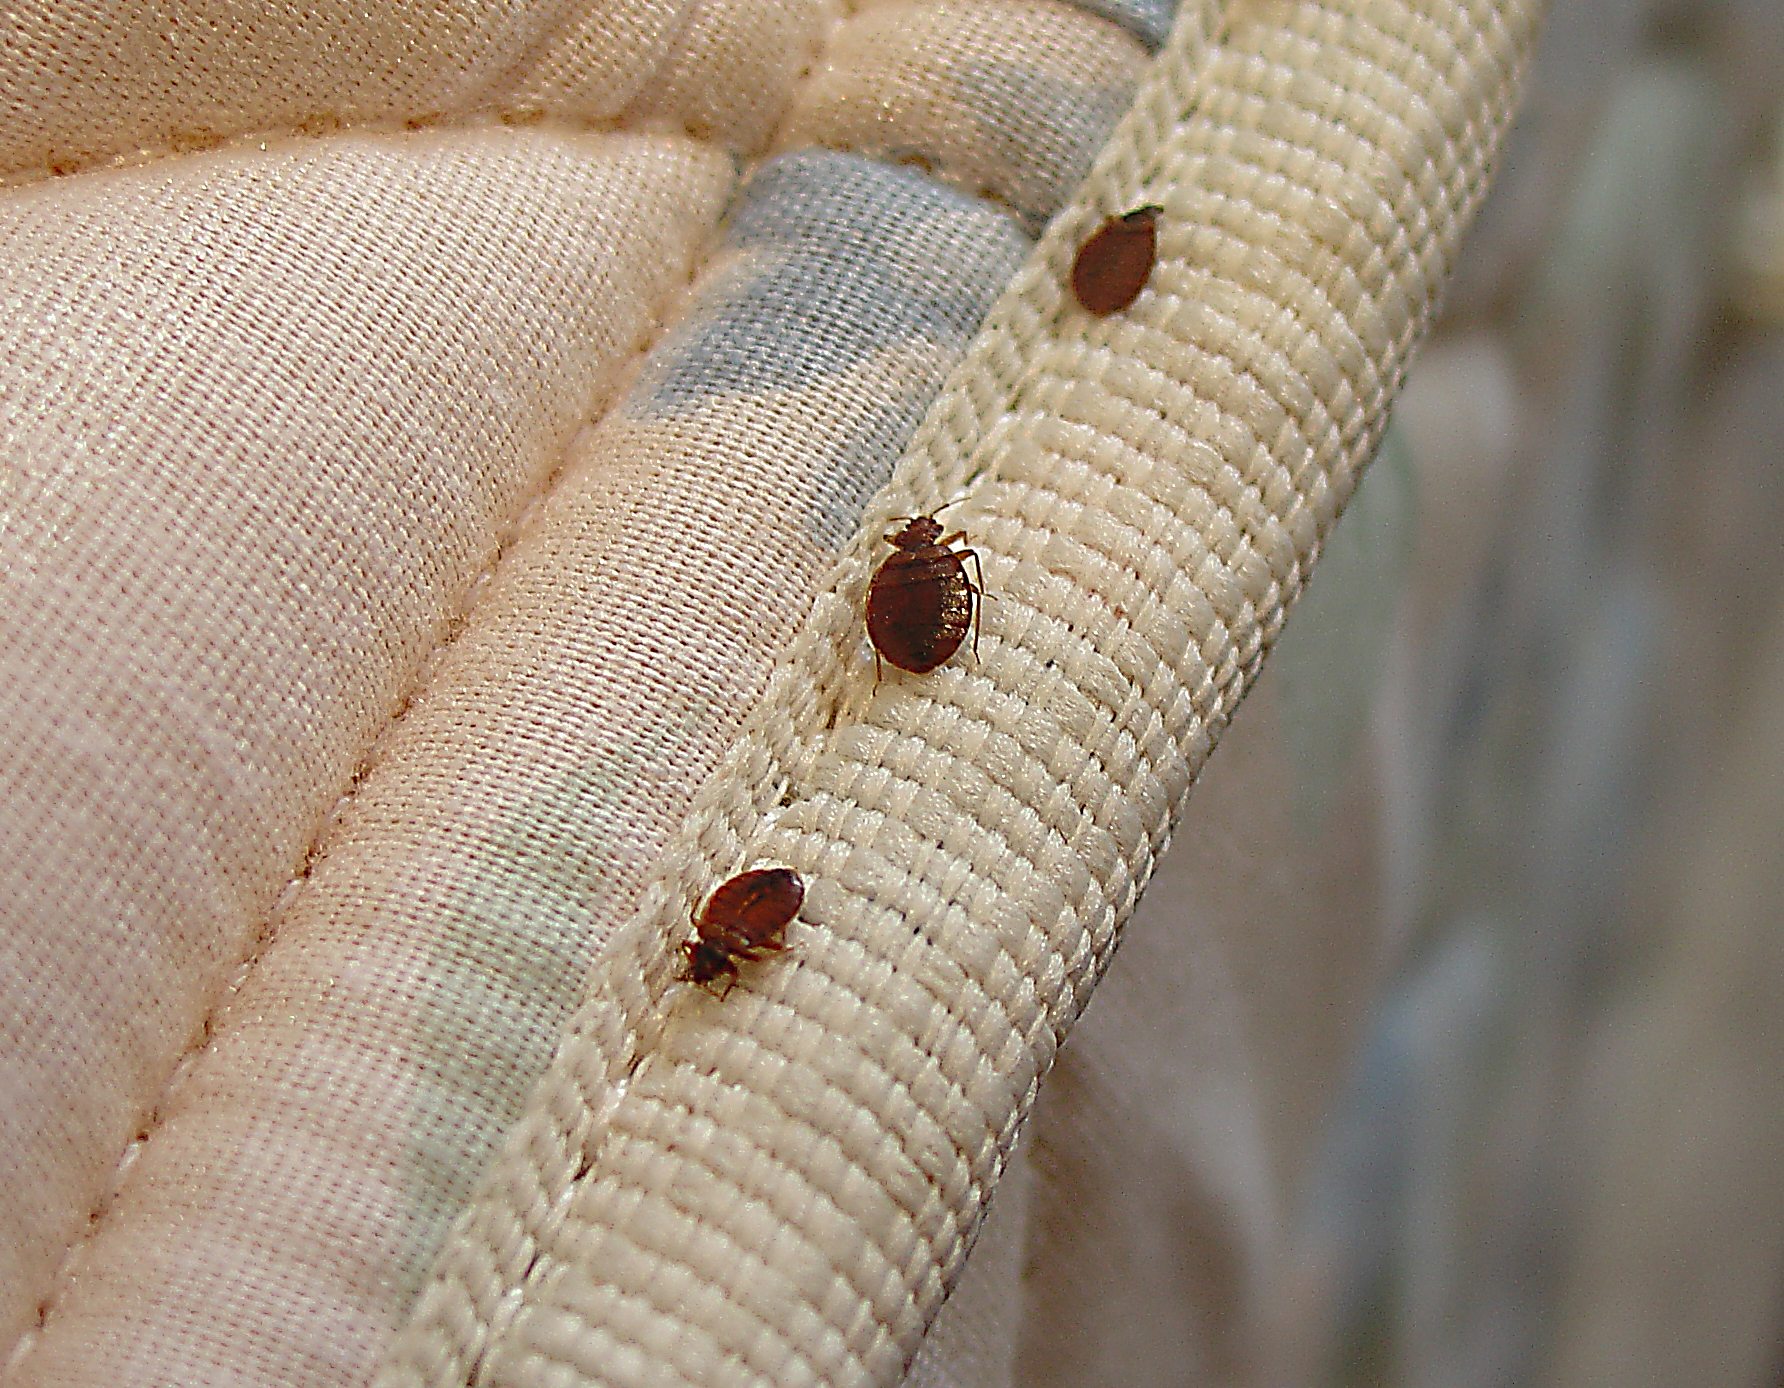 bed-bugs-in-bed_1784x1388.jpg